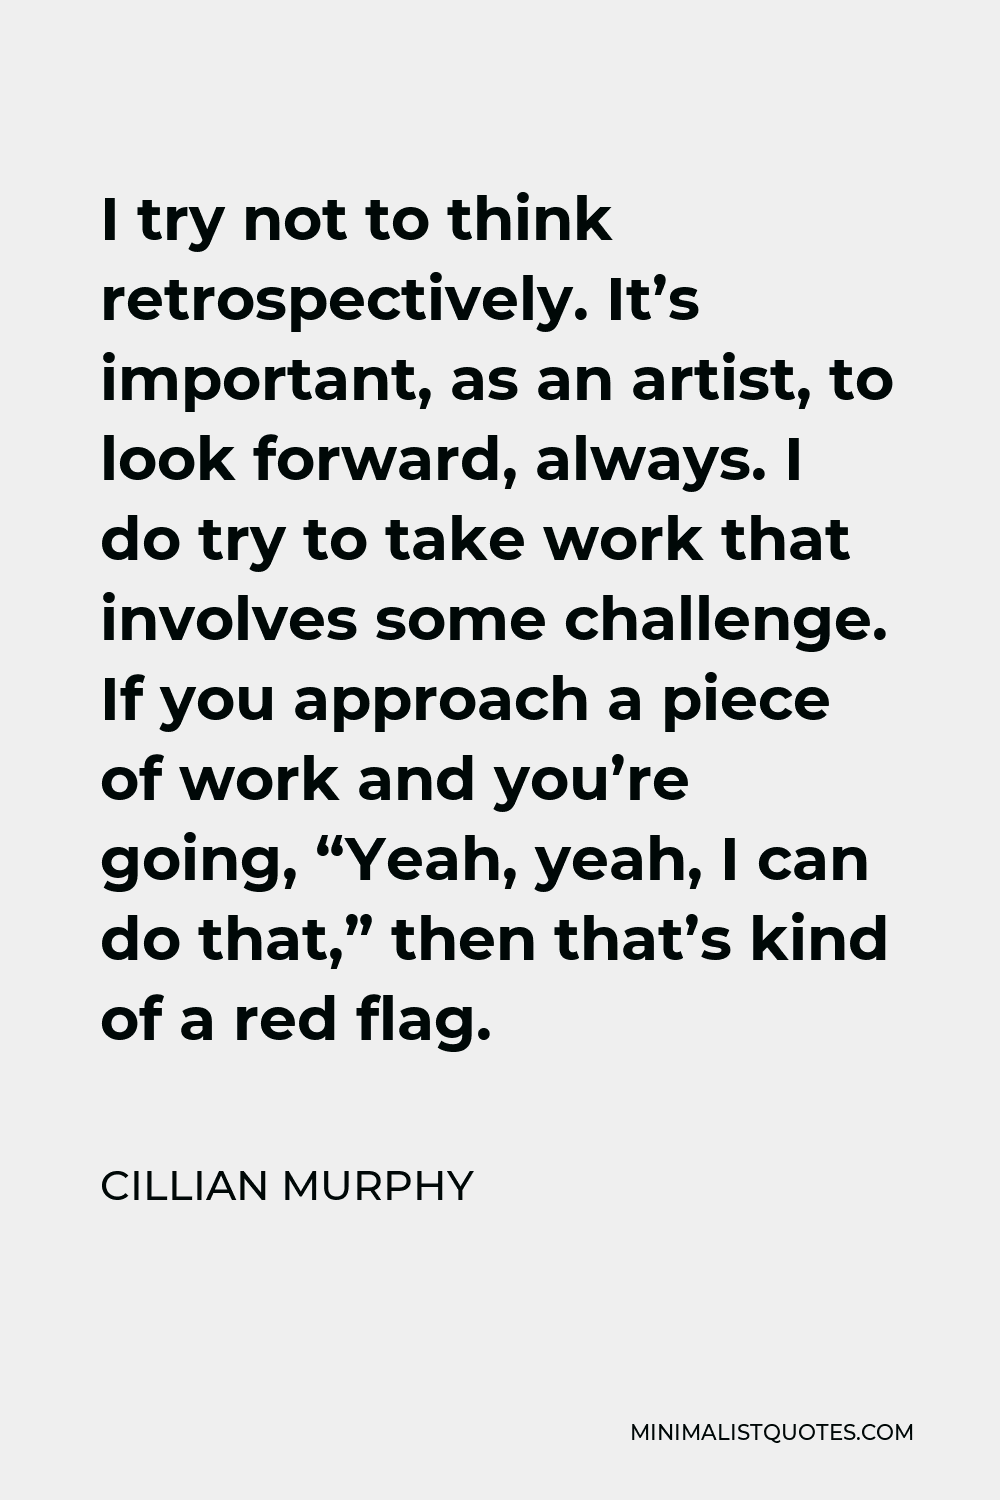 Cillian Murphy Quote - I try not to think retrospectively. It’s important, as an artist, to look forward, always. I do try to take work that involves some challenge. If you approach a piece of work and you’re going, “Yeah, yeah, I can do that,” then that’s kind of a red flag.